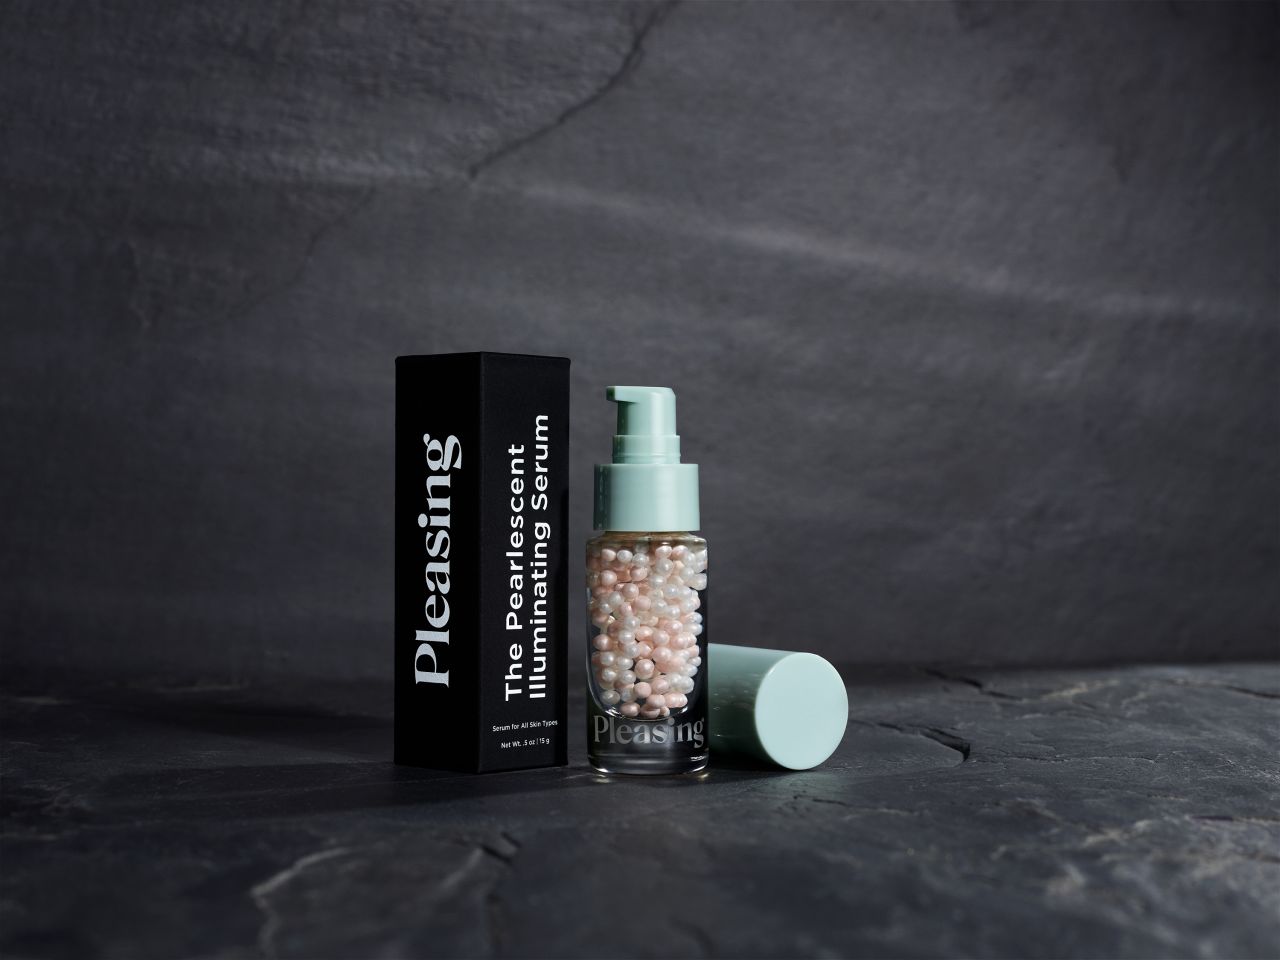 The Pearlescent Illuminating Serum, which was inspired by Japanese pearl divers.